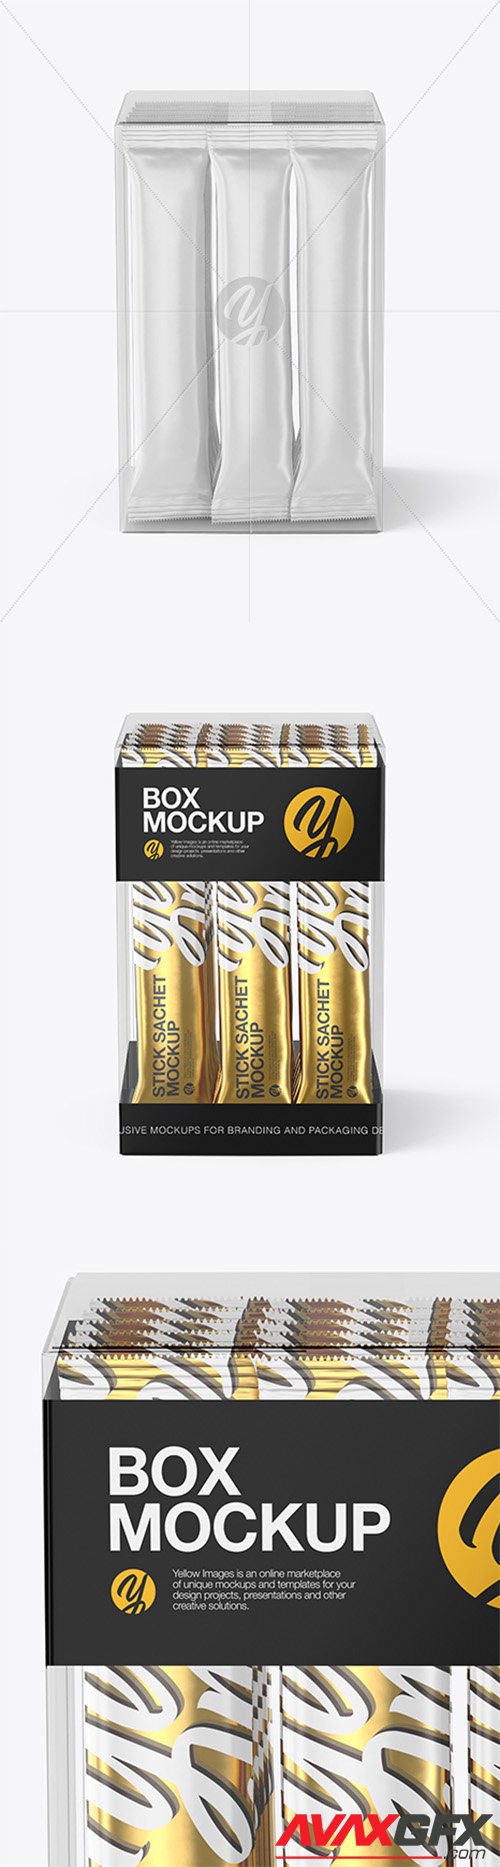 Download 25 Opened Box 20 Matte Sachets Front View Psd Mockup Psd PSD Mockup Templates